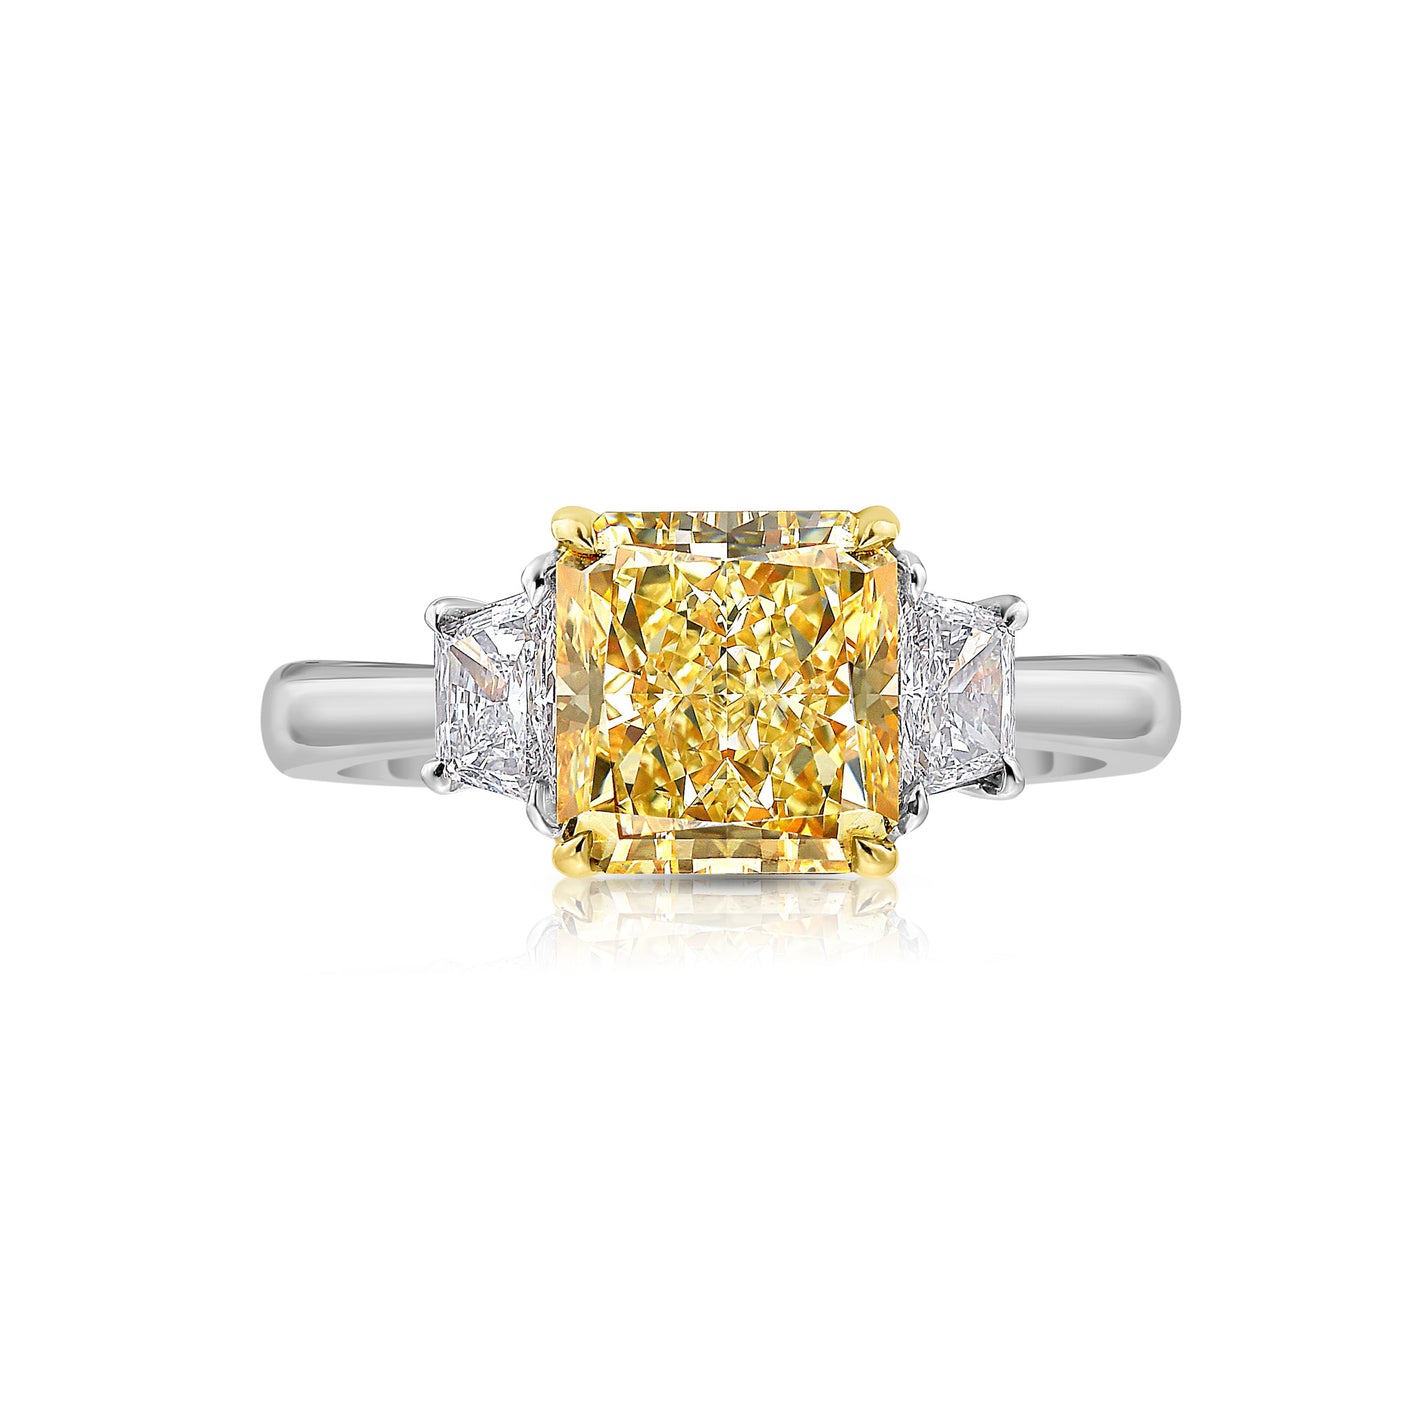 2ct Fancy Yellow Radiant Diamond Engagement Ring – Rare Colors